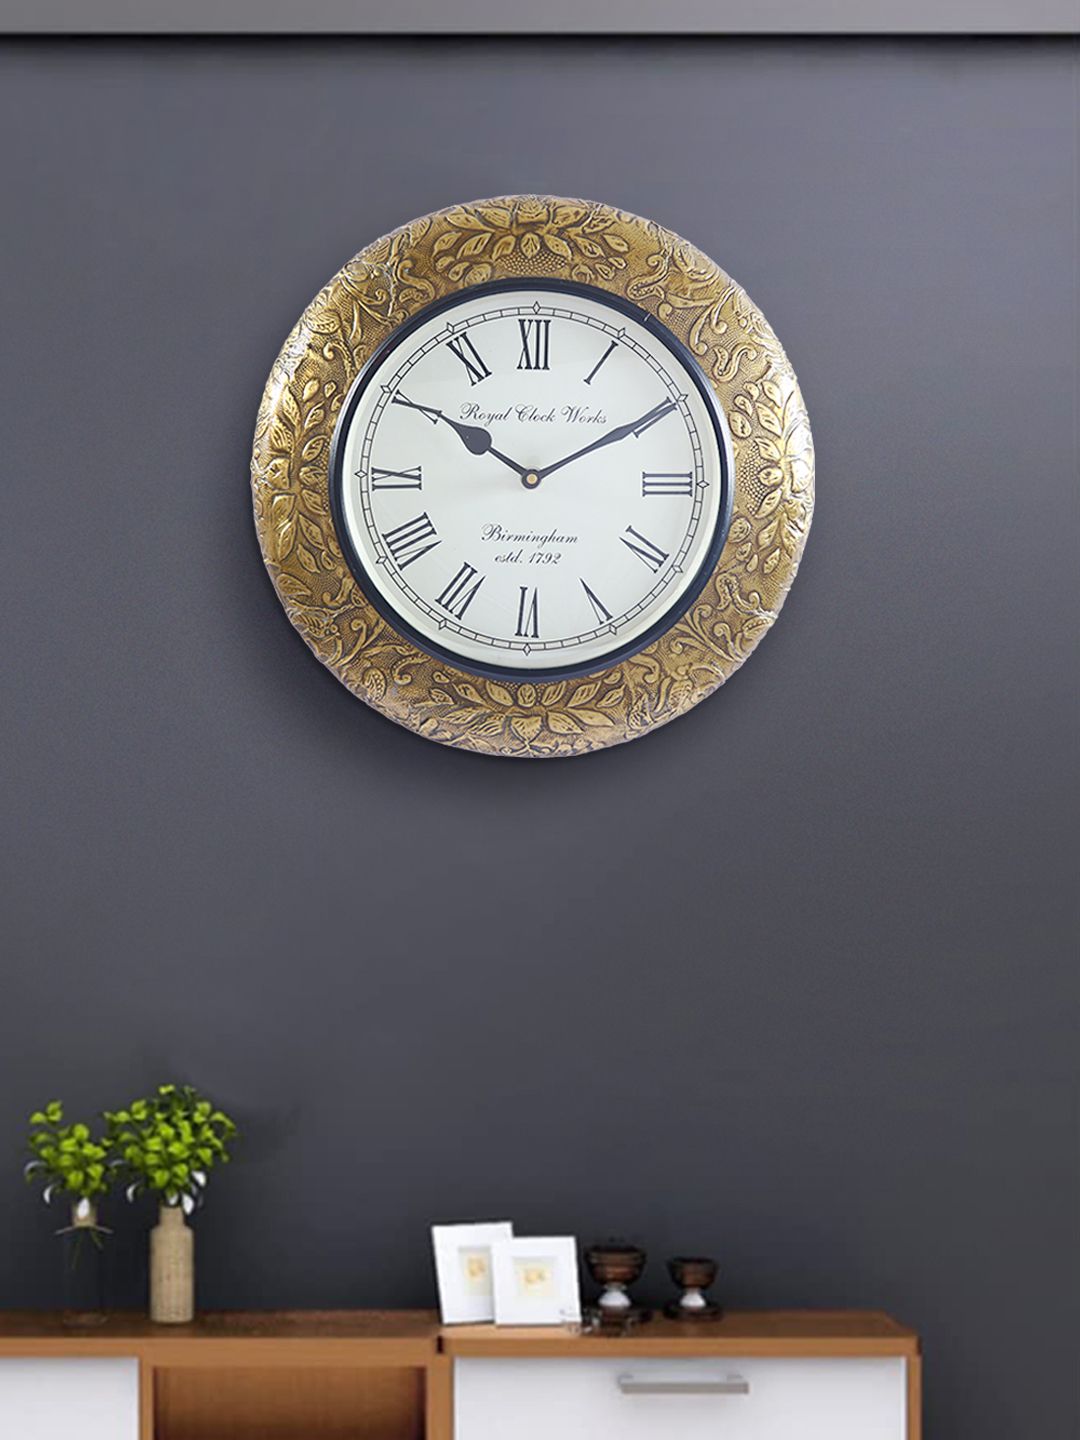 Aapno Rajasthan Gold-Toned & White Textured Round Contemporary Wall Clock Price in India